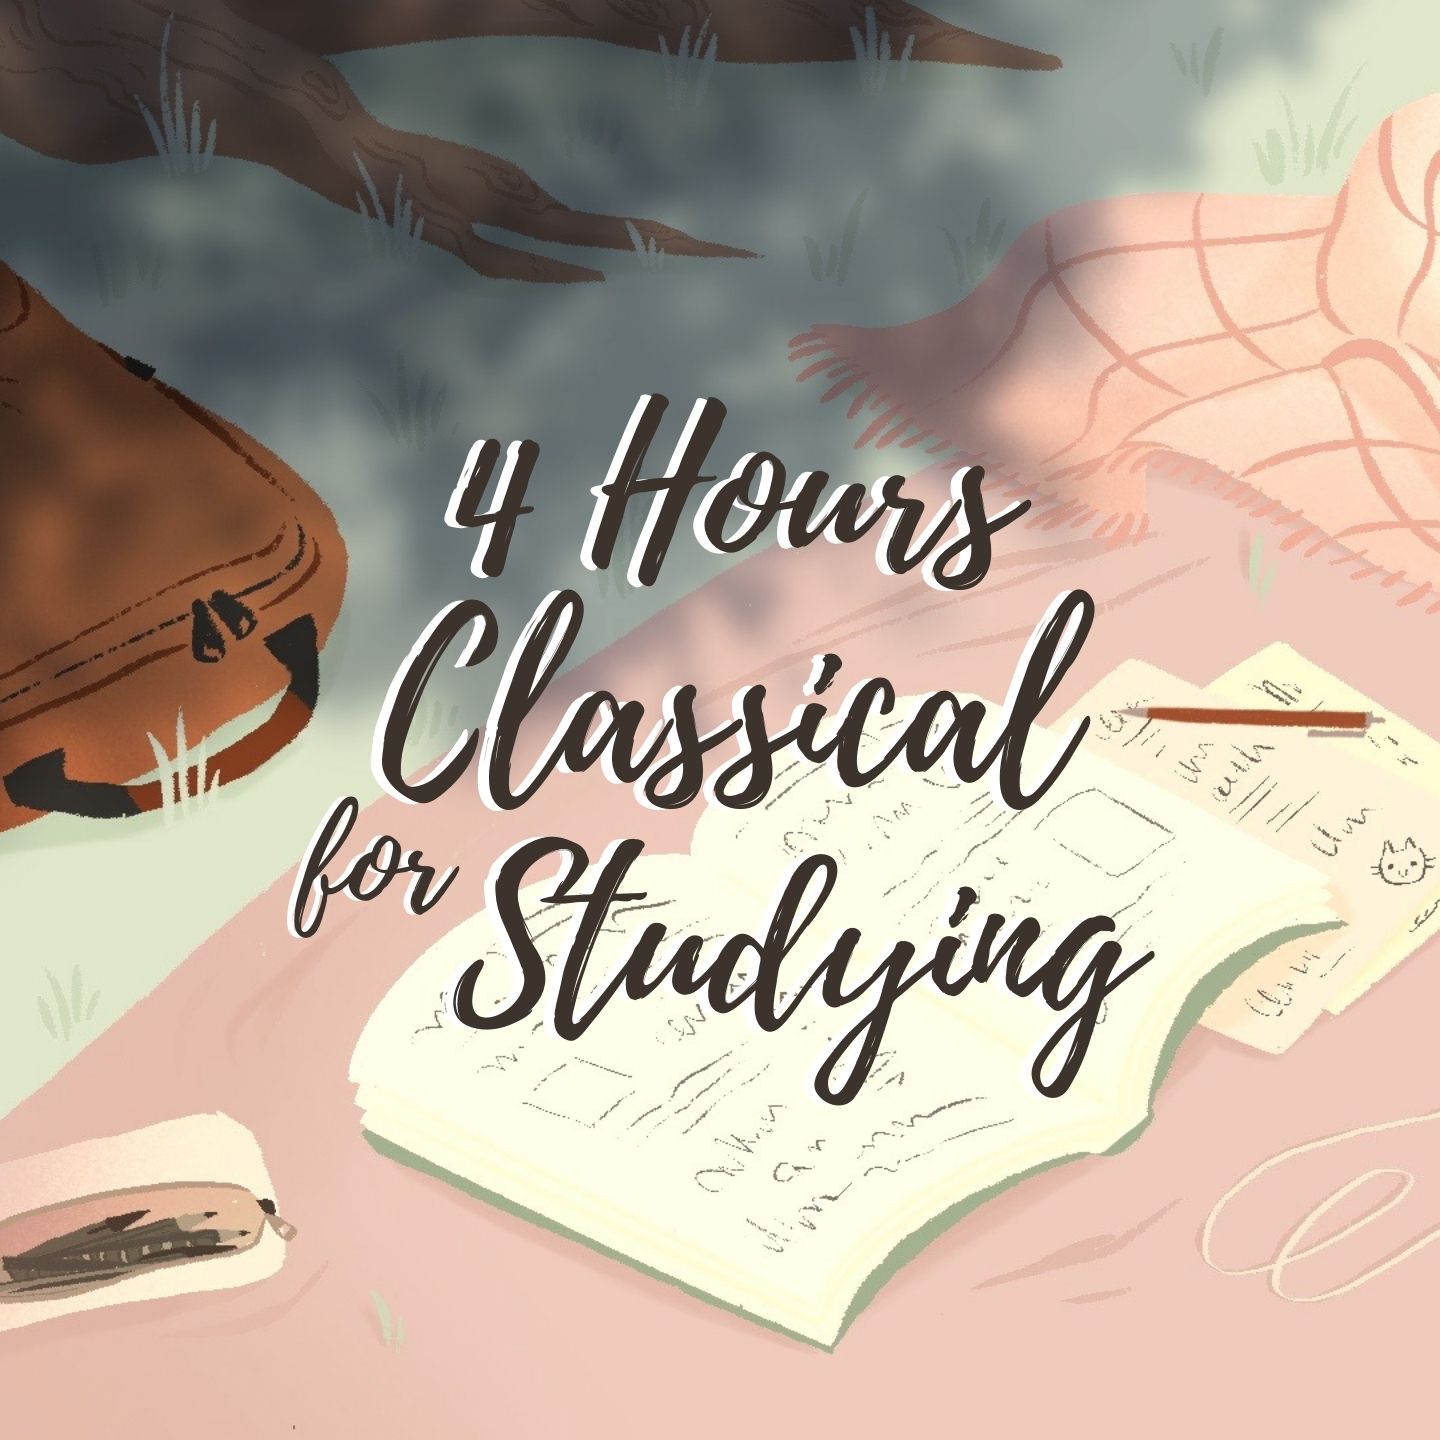 4 Hours of Classical Music for Relaxation, Studying & Concentration